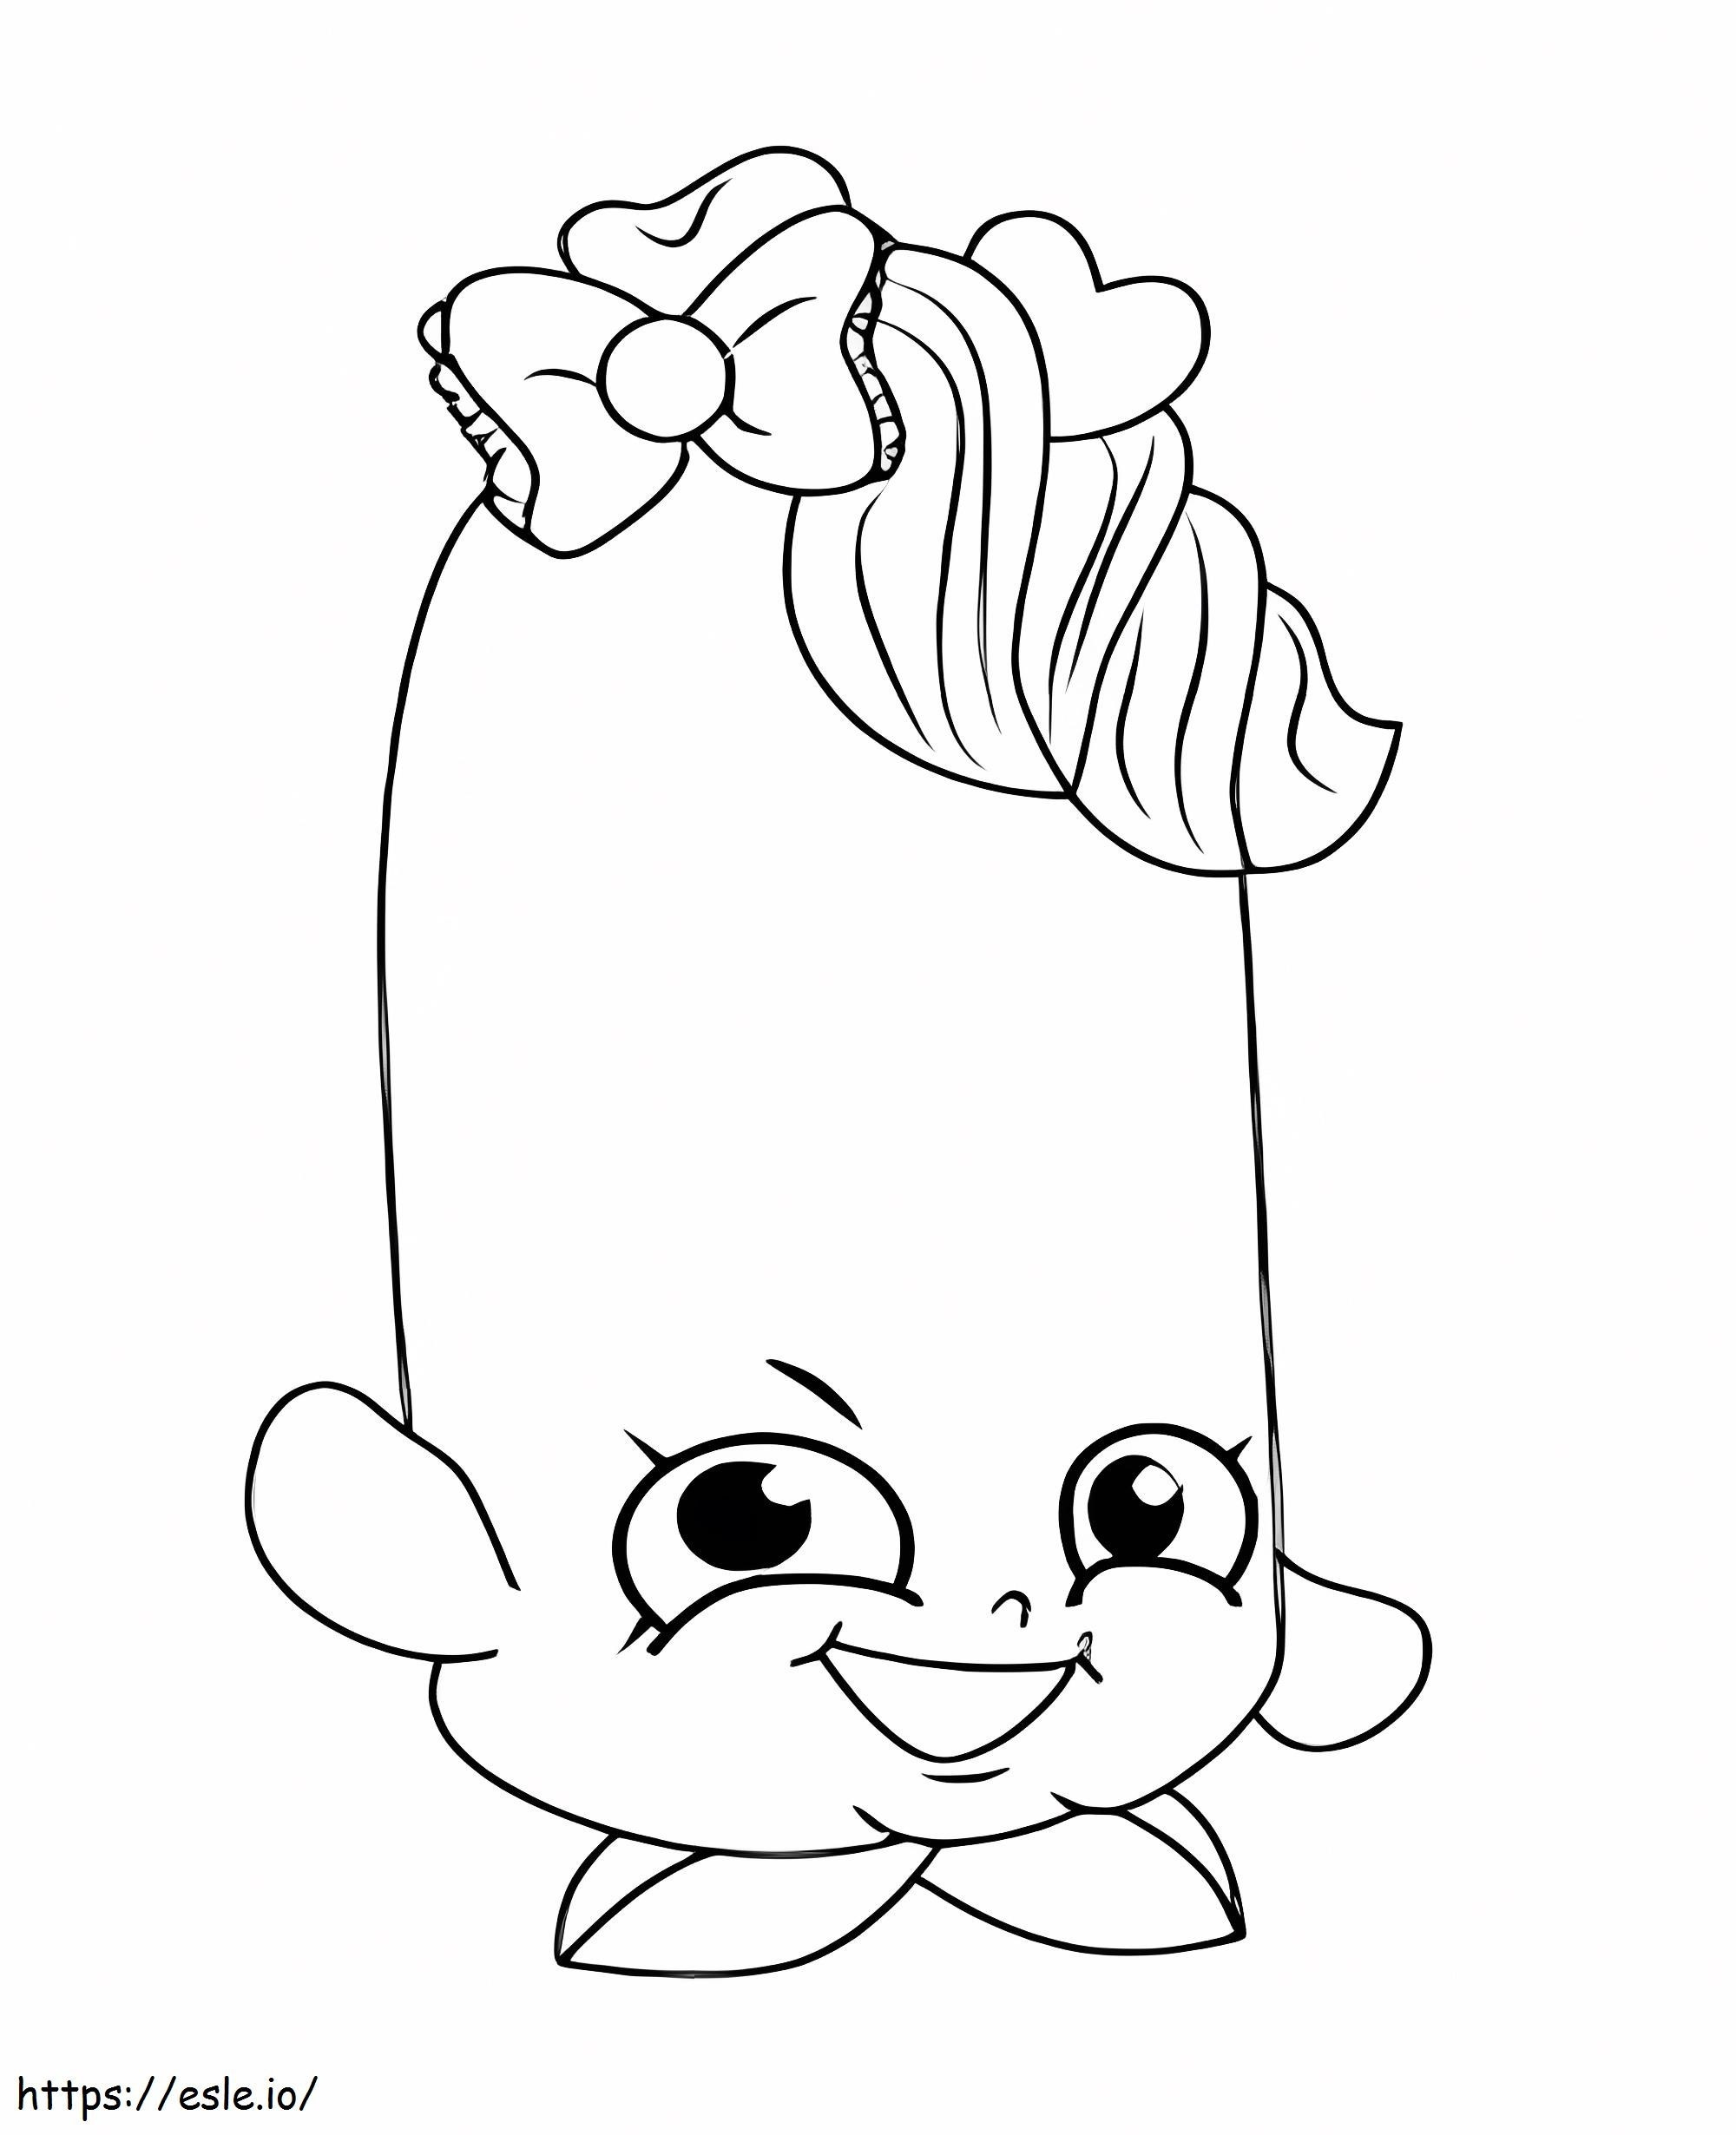 Twinky Winks Shopkin coloring page